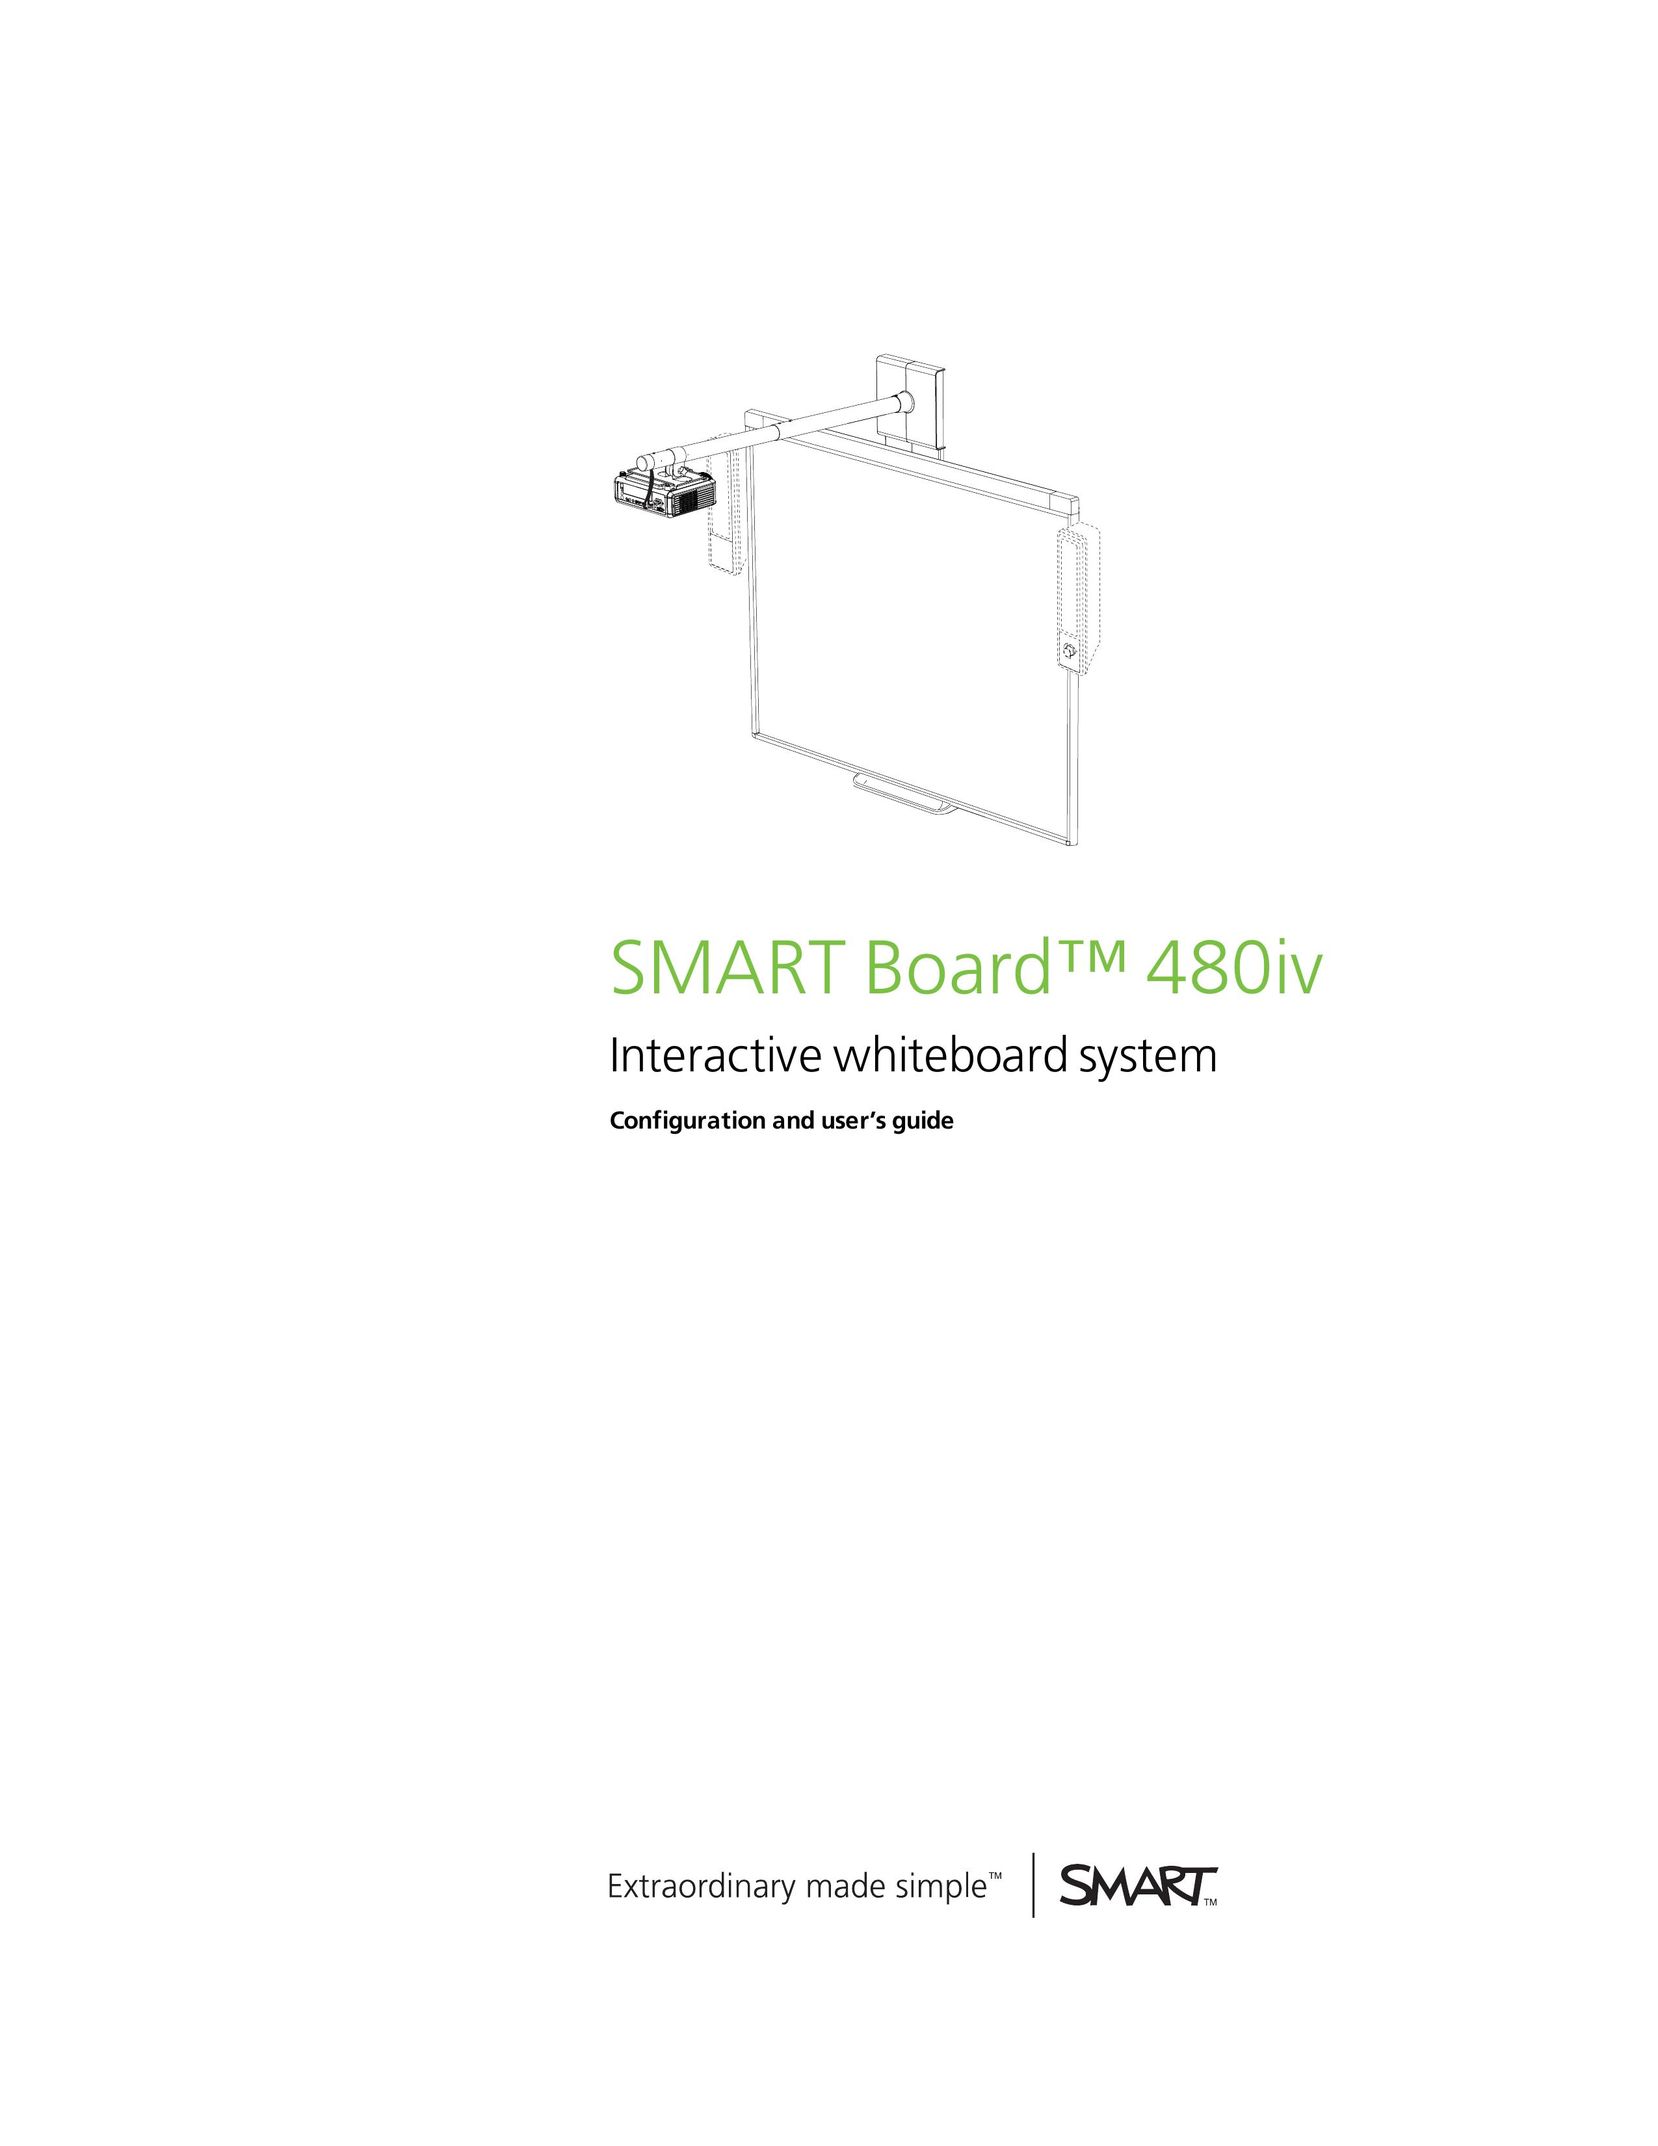 Smart Technologies 480iv Whiteboard Accessories User Manual